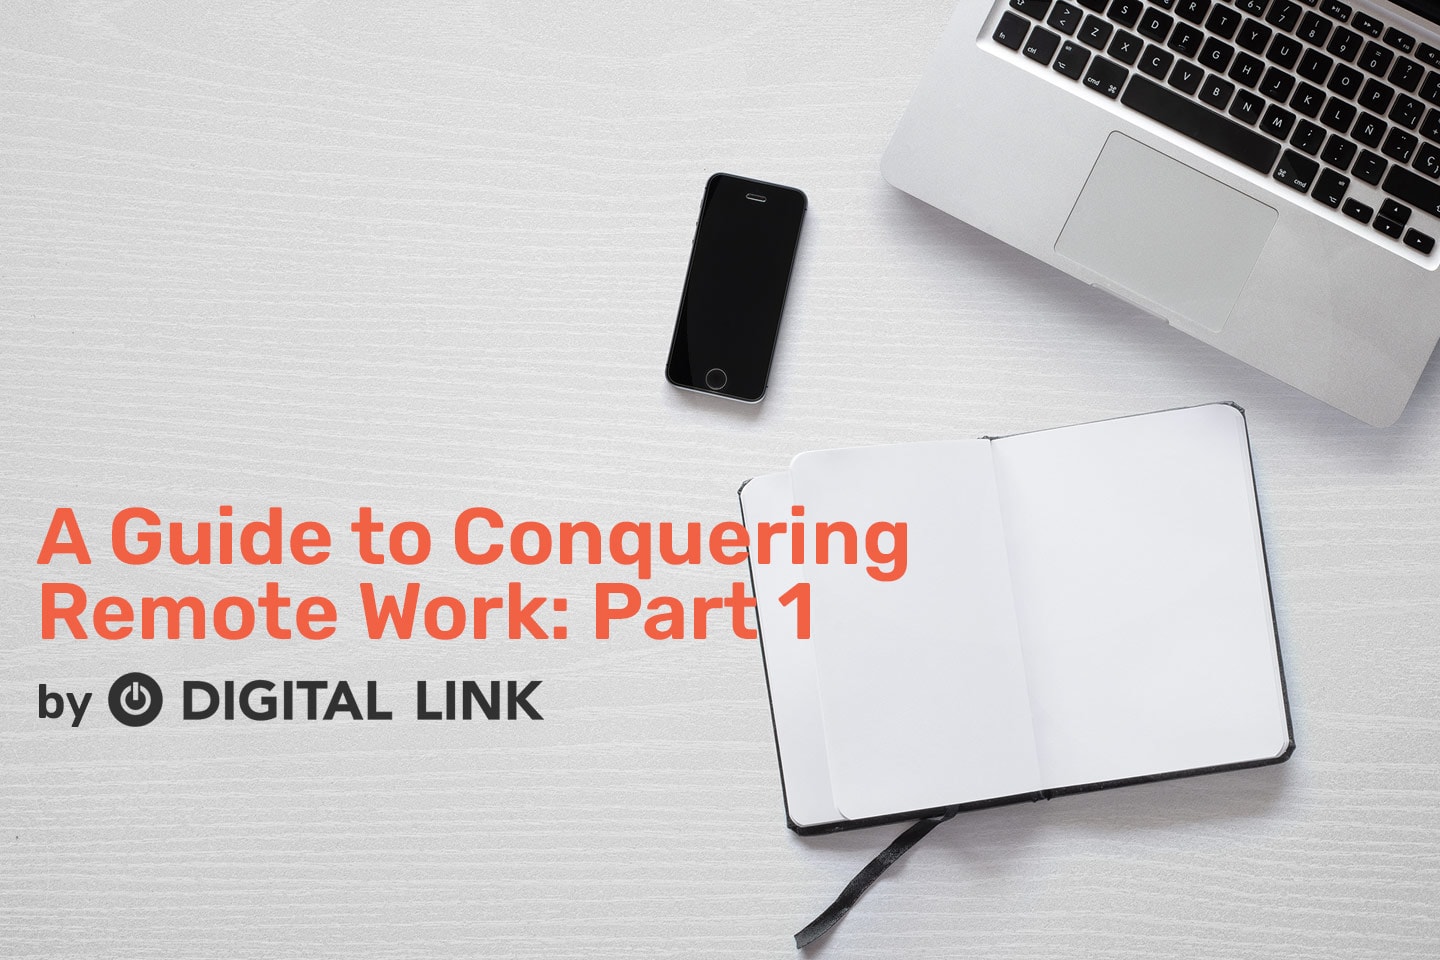 A Guide to Conquering Remote Work; Part 1